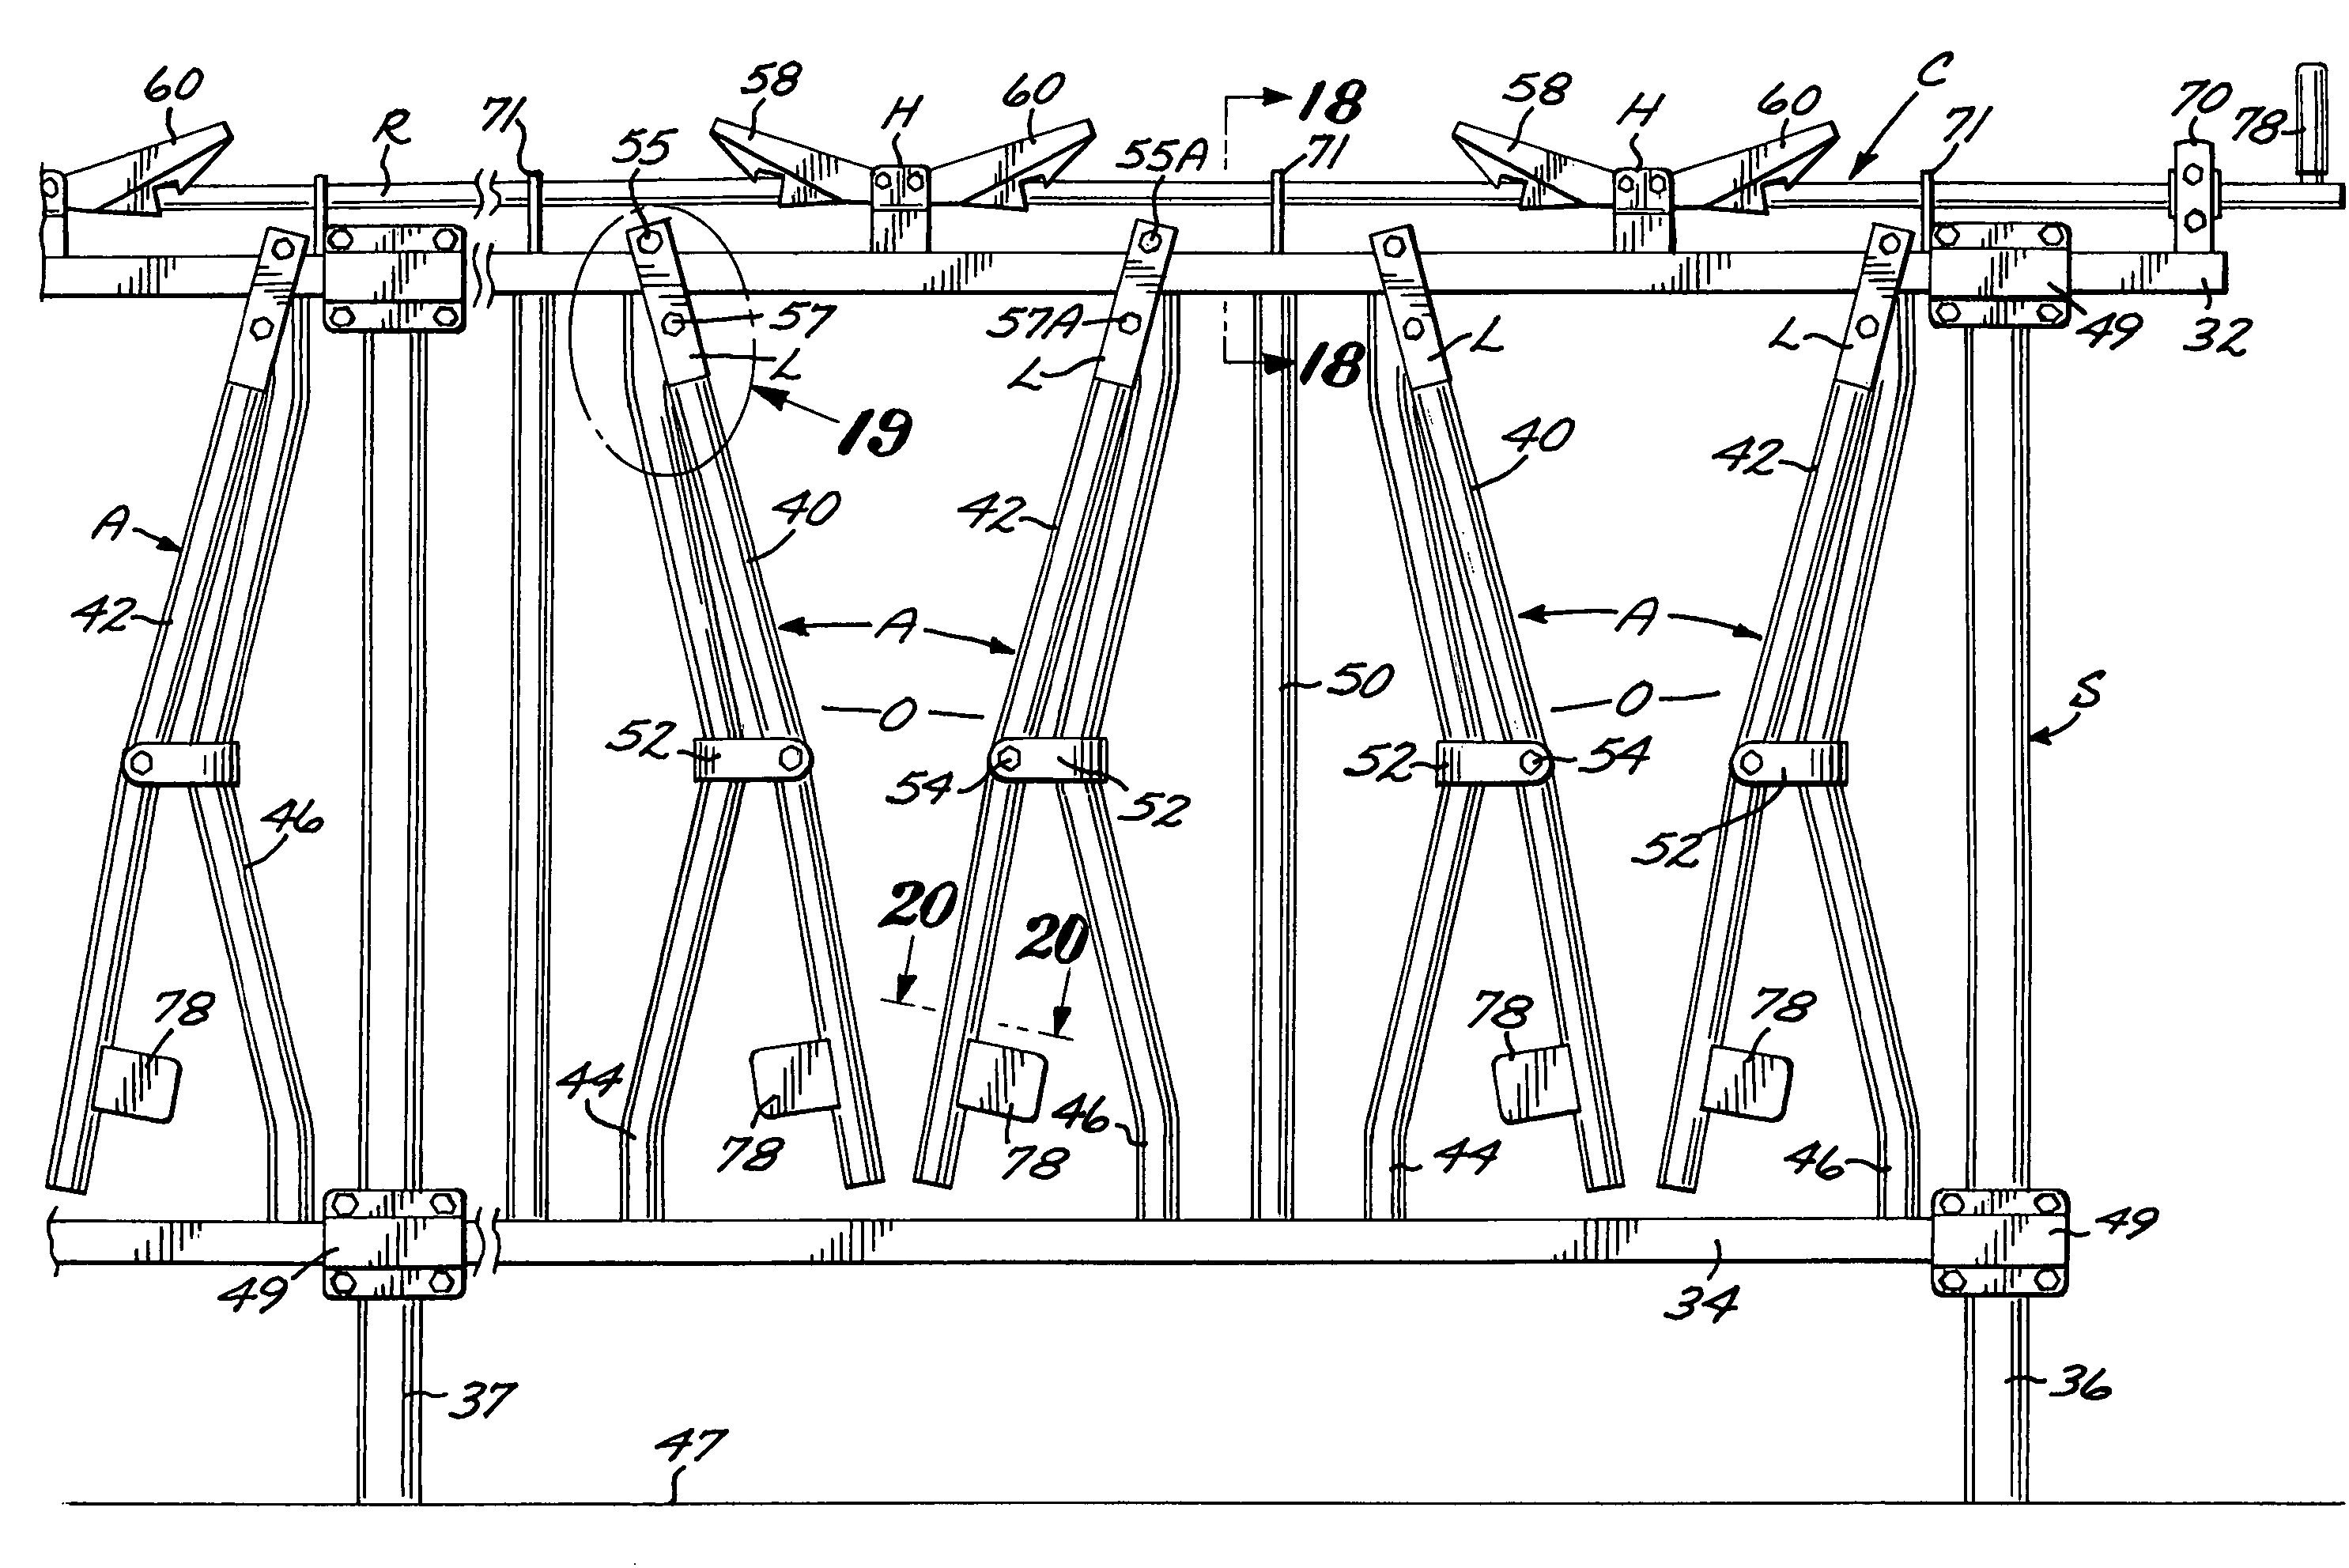 Double-release bar for a cow stanchion apparatus